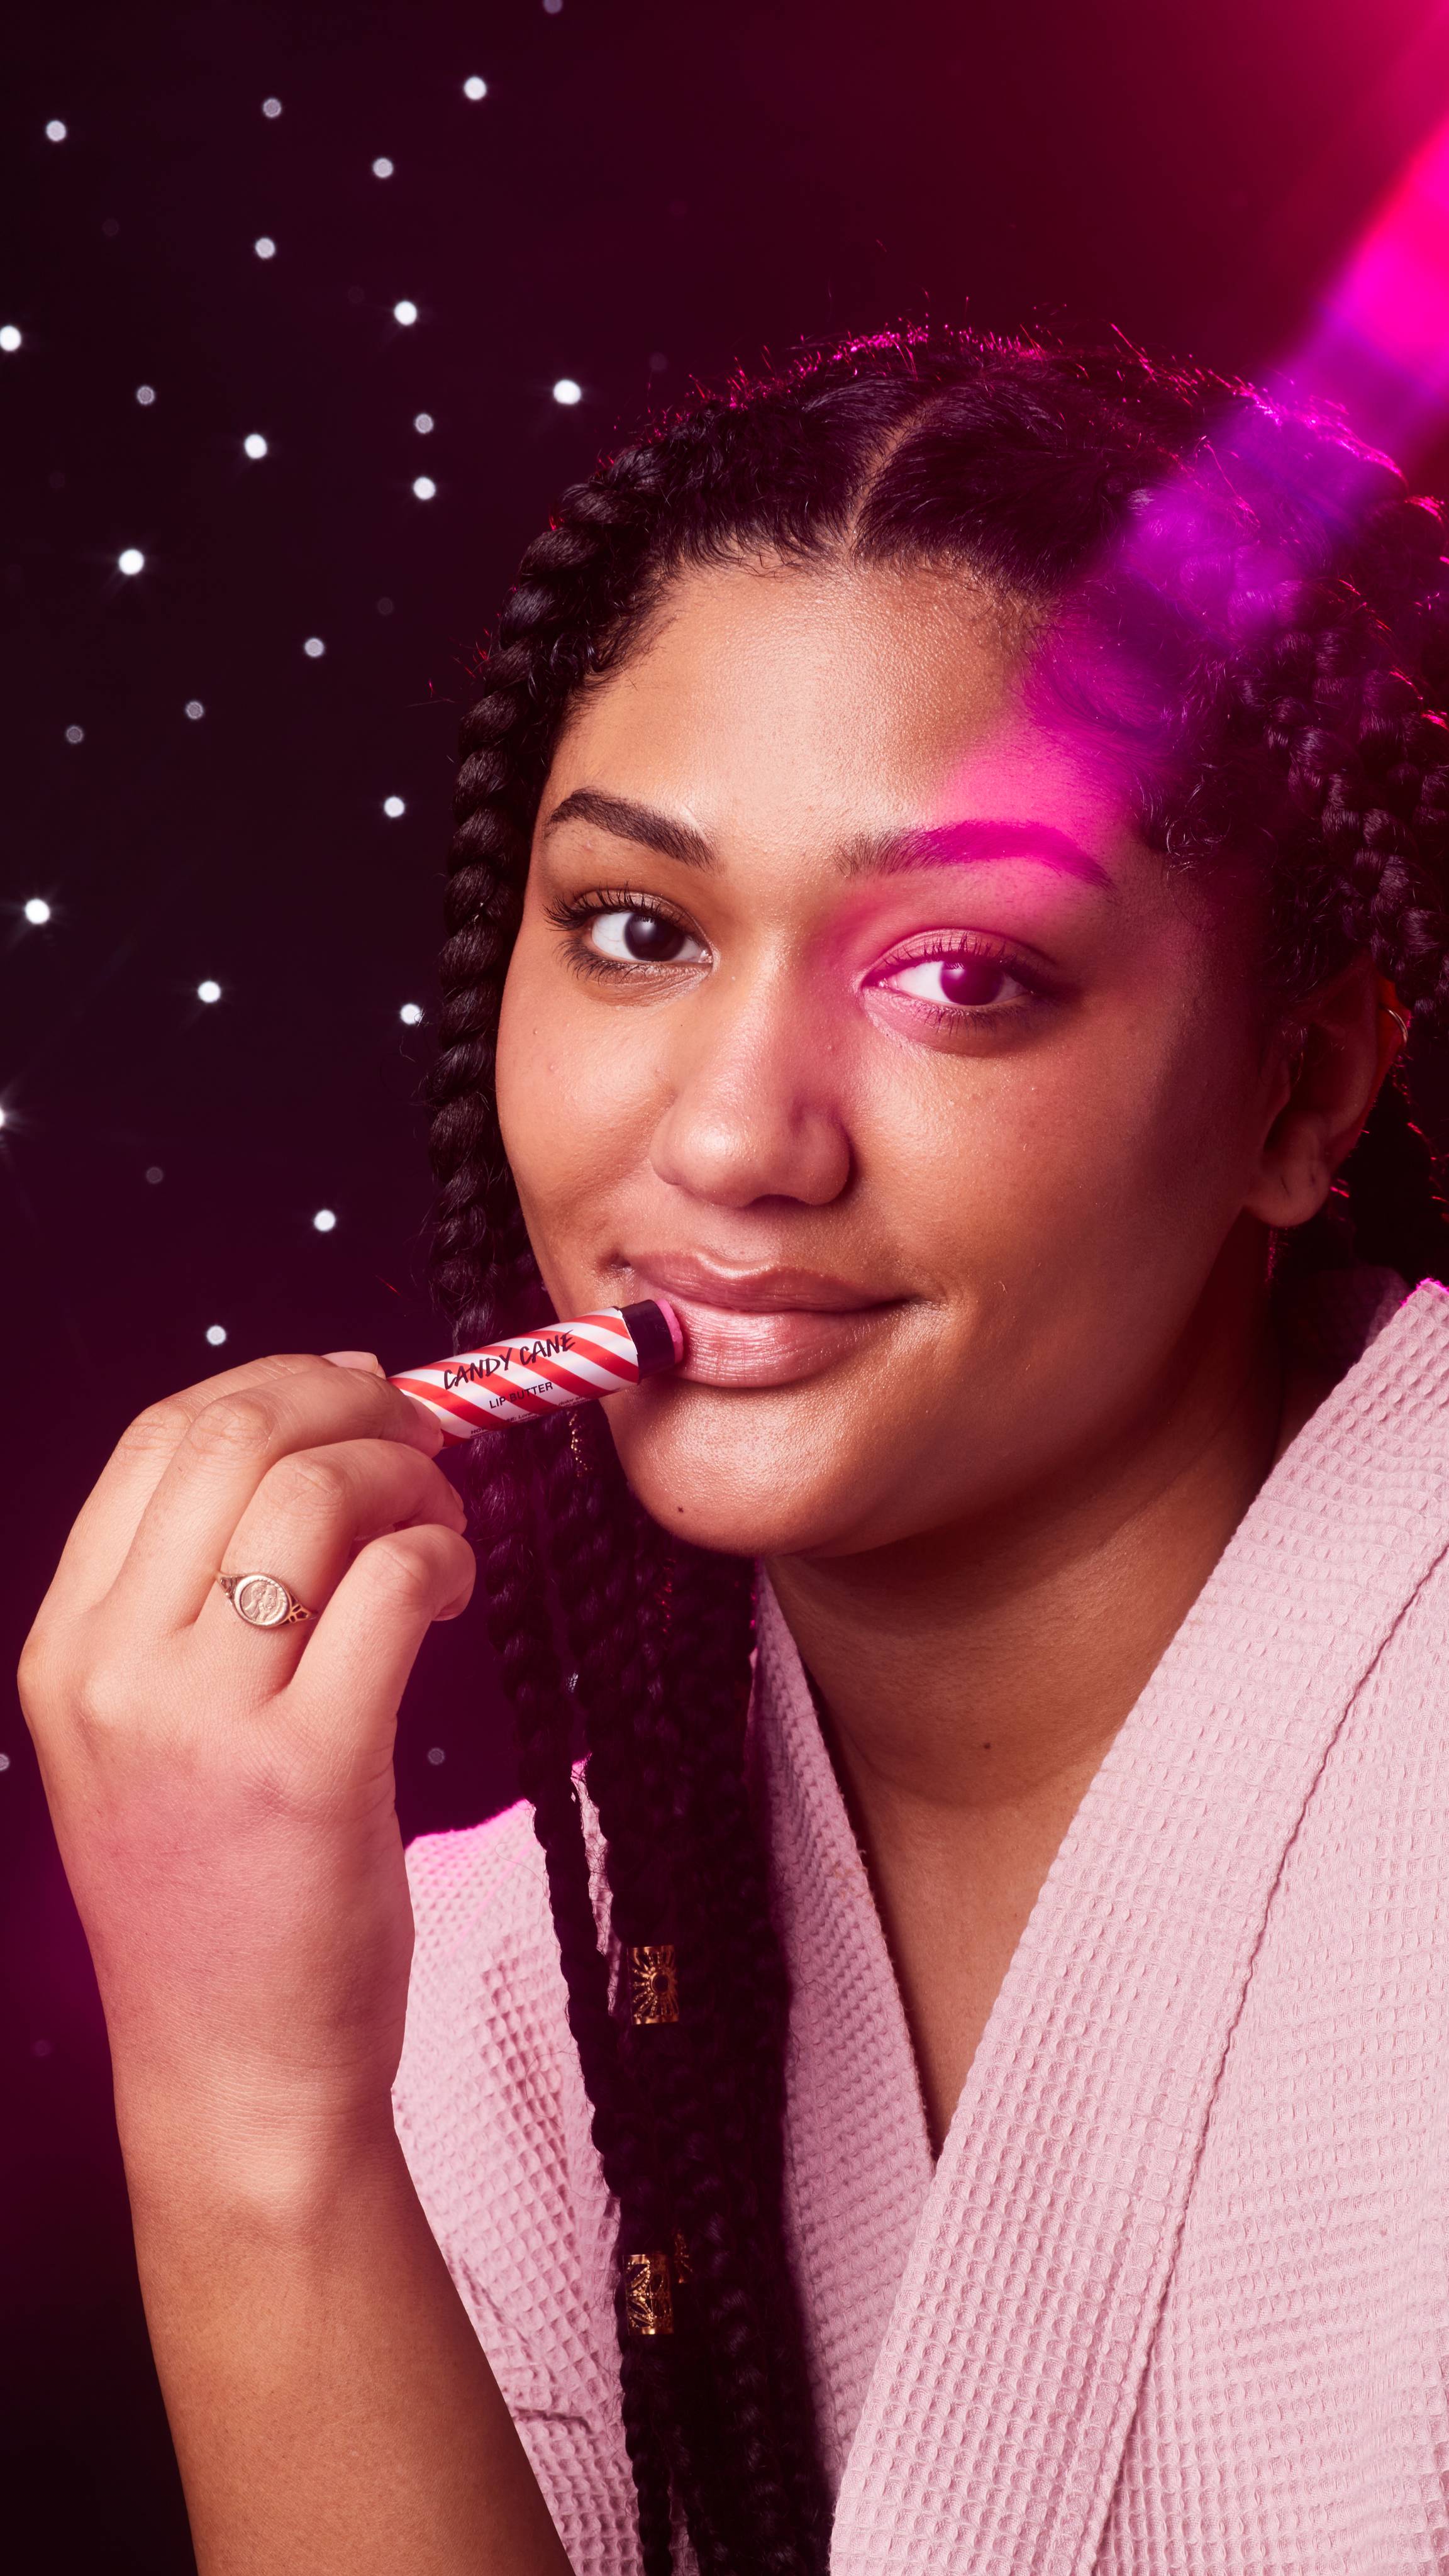 Image shows the model facing the camera with a starry backdrop as they apply the Candy Cane lip butter.